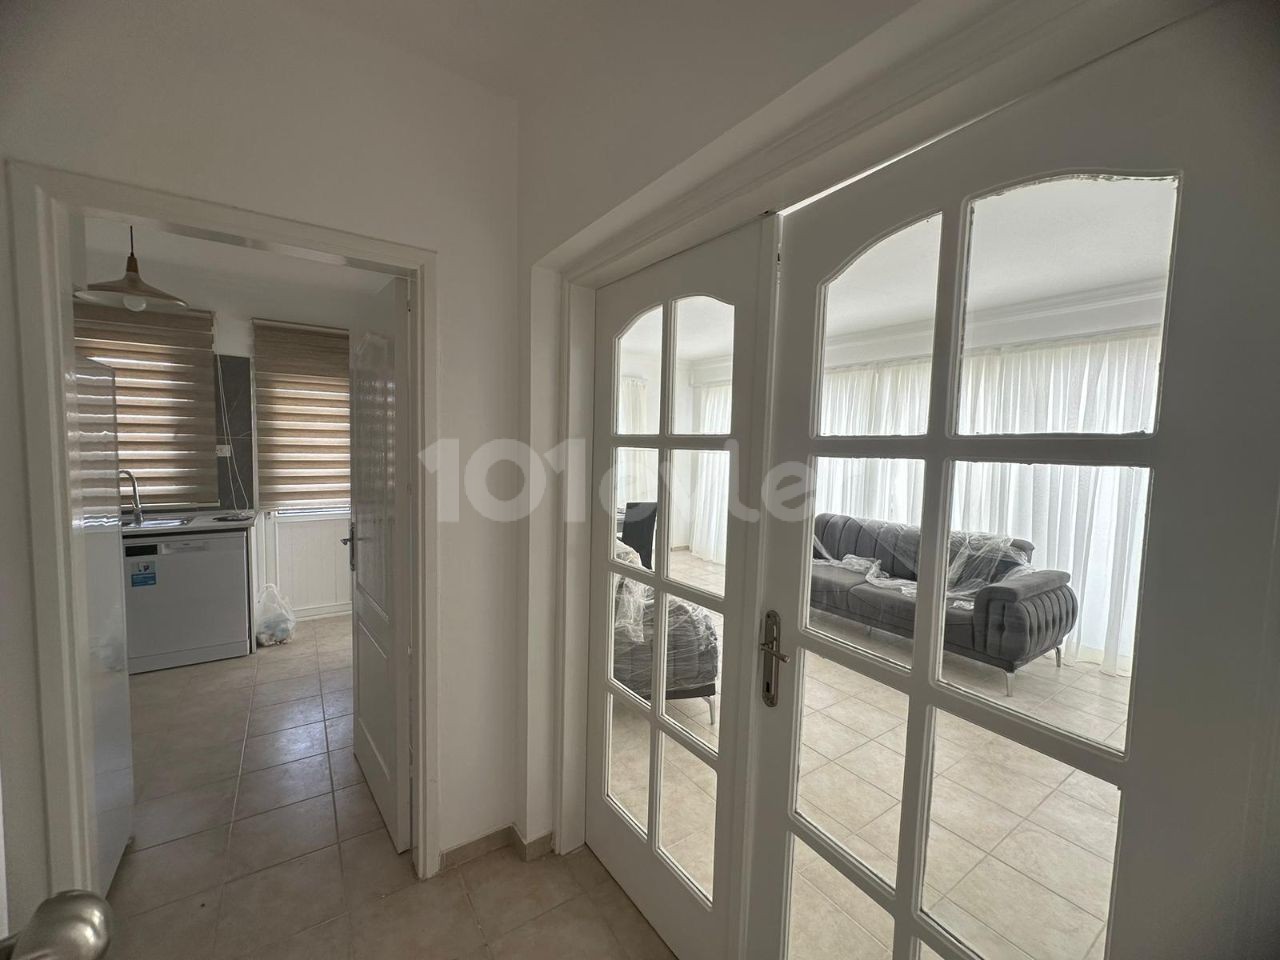 3+1 FLAT FOR RENT AROUND LORDPALAS HOTEL +905428885177